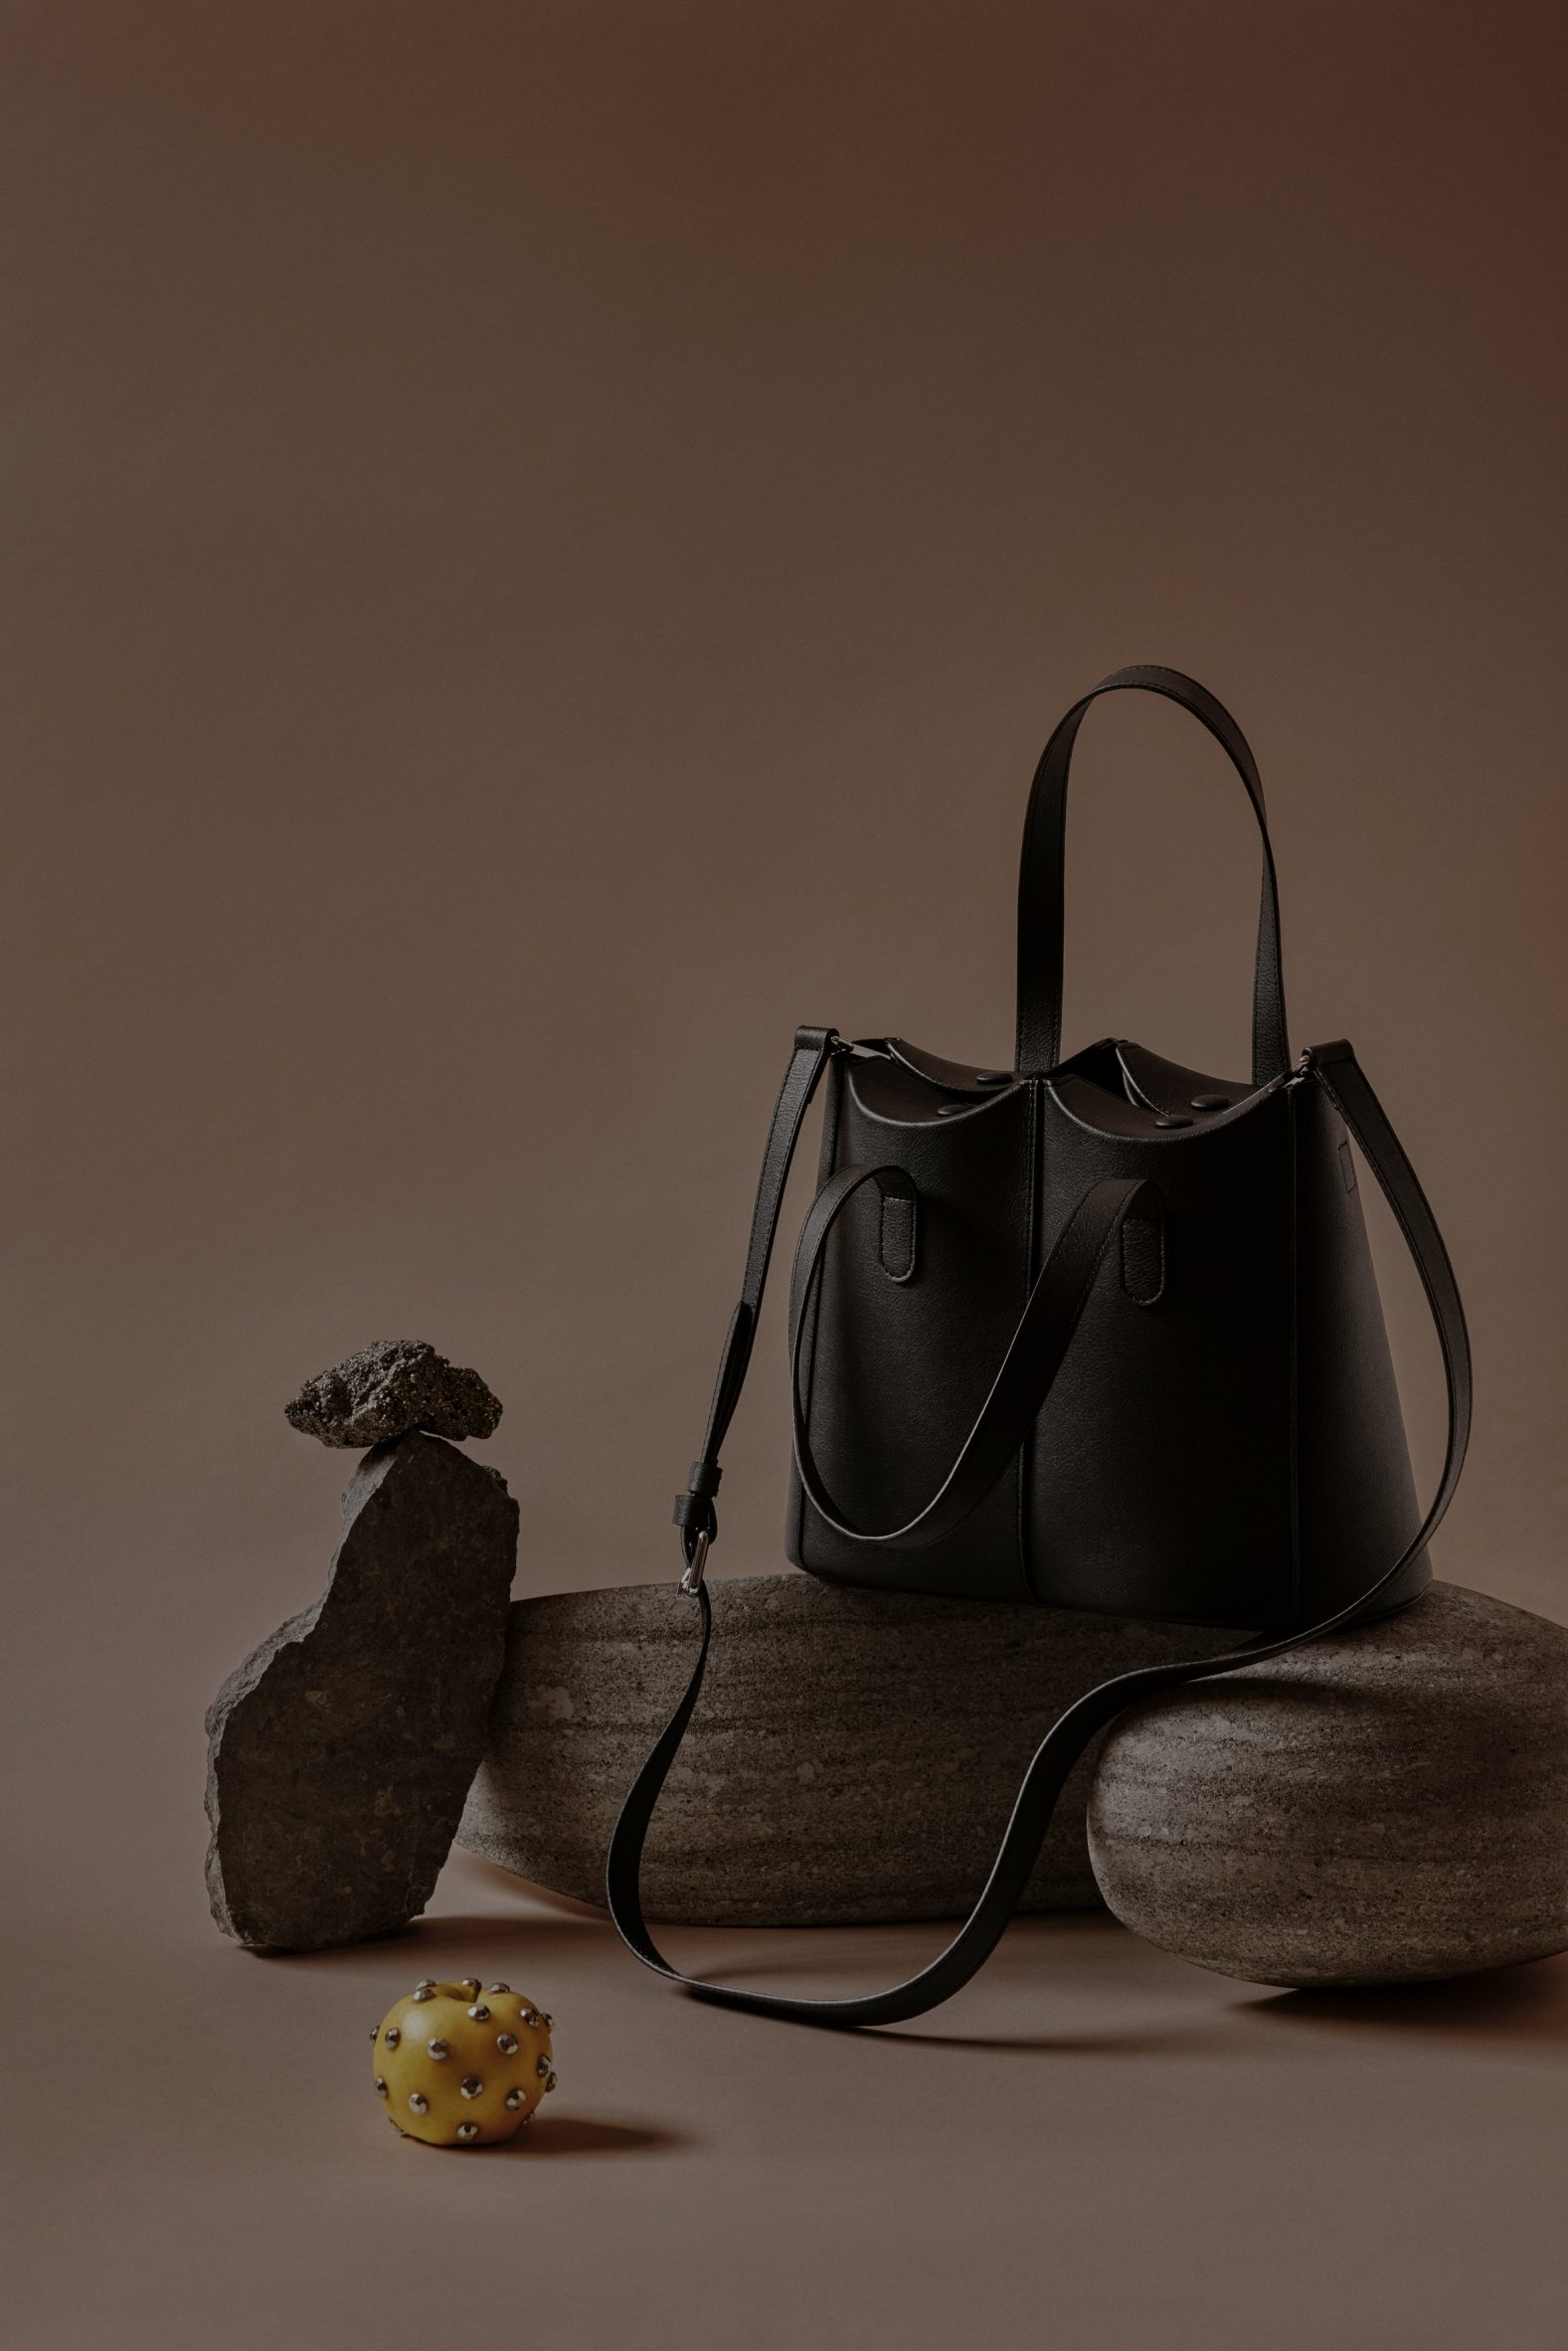 Photo of the Malala bag by Luca Nichetto and Angela Roi arranged in a still life